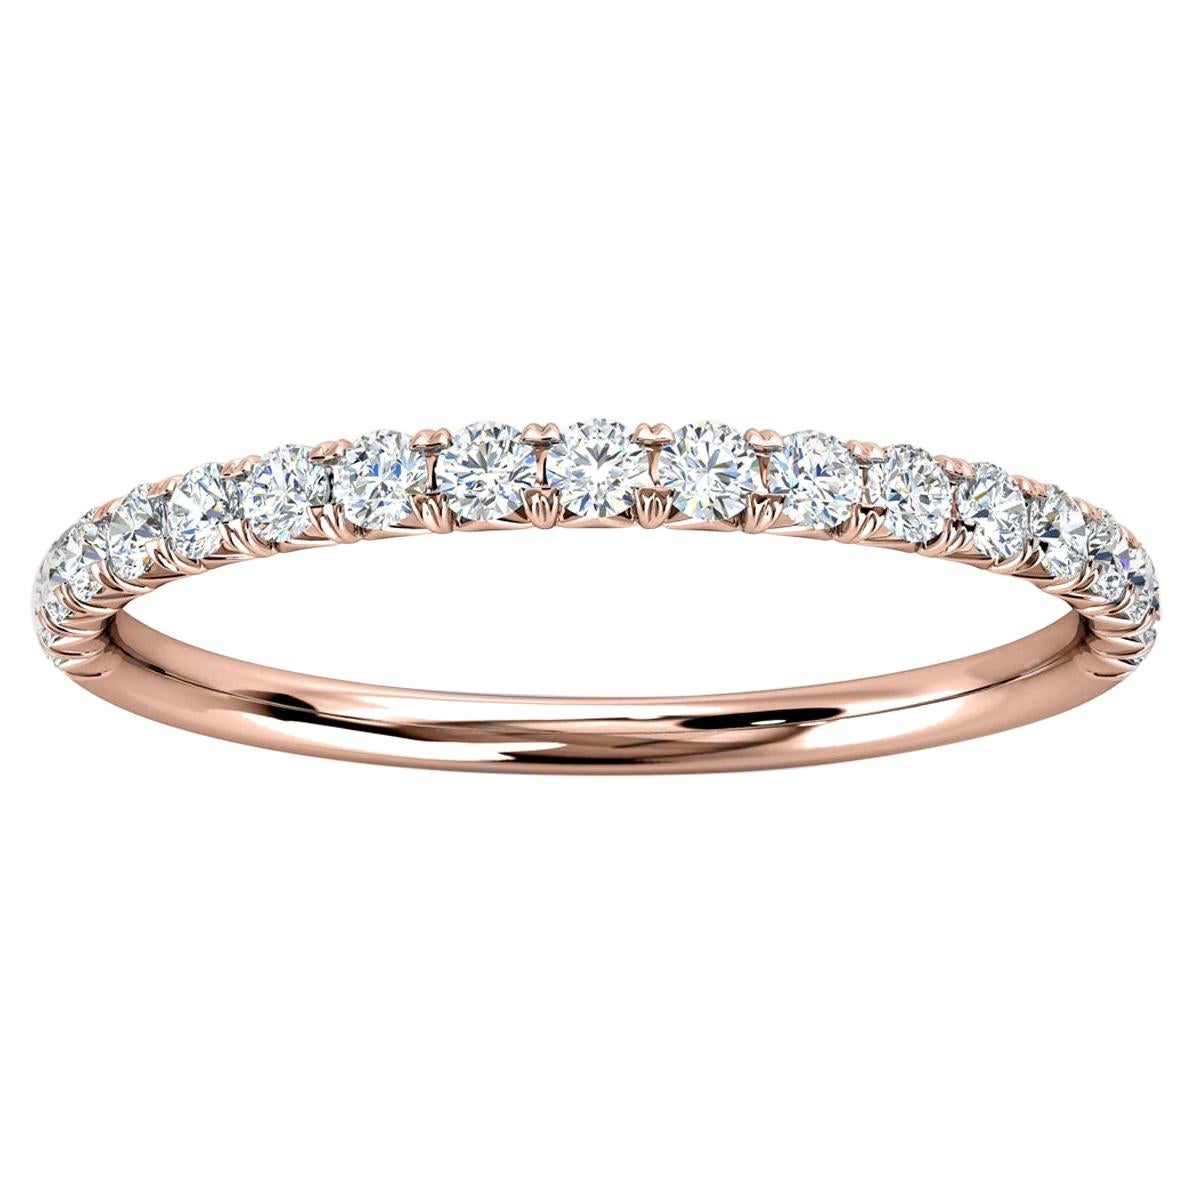 For Sale:  18k Rose Gold Voyage French Pave Diamond Ring '1/4 Ct. Tw'